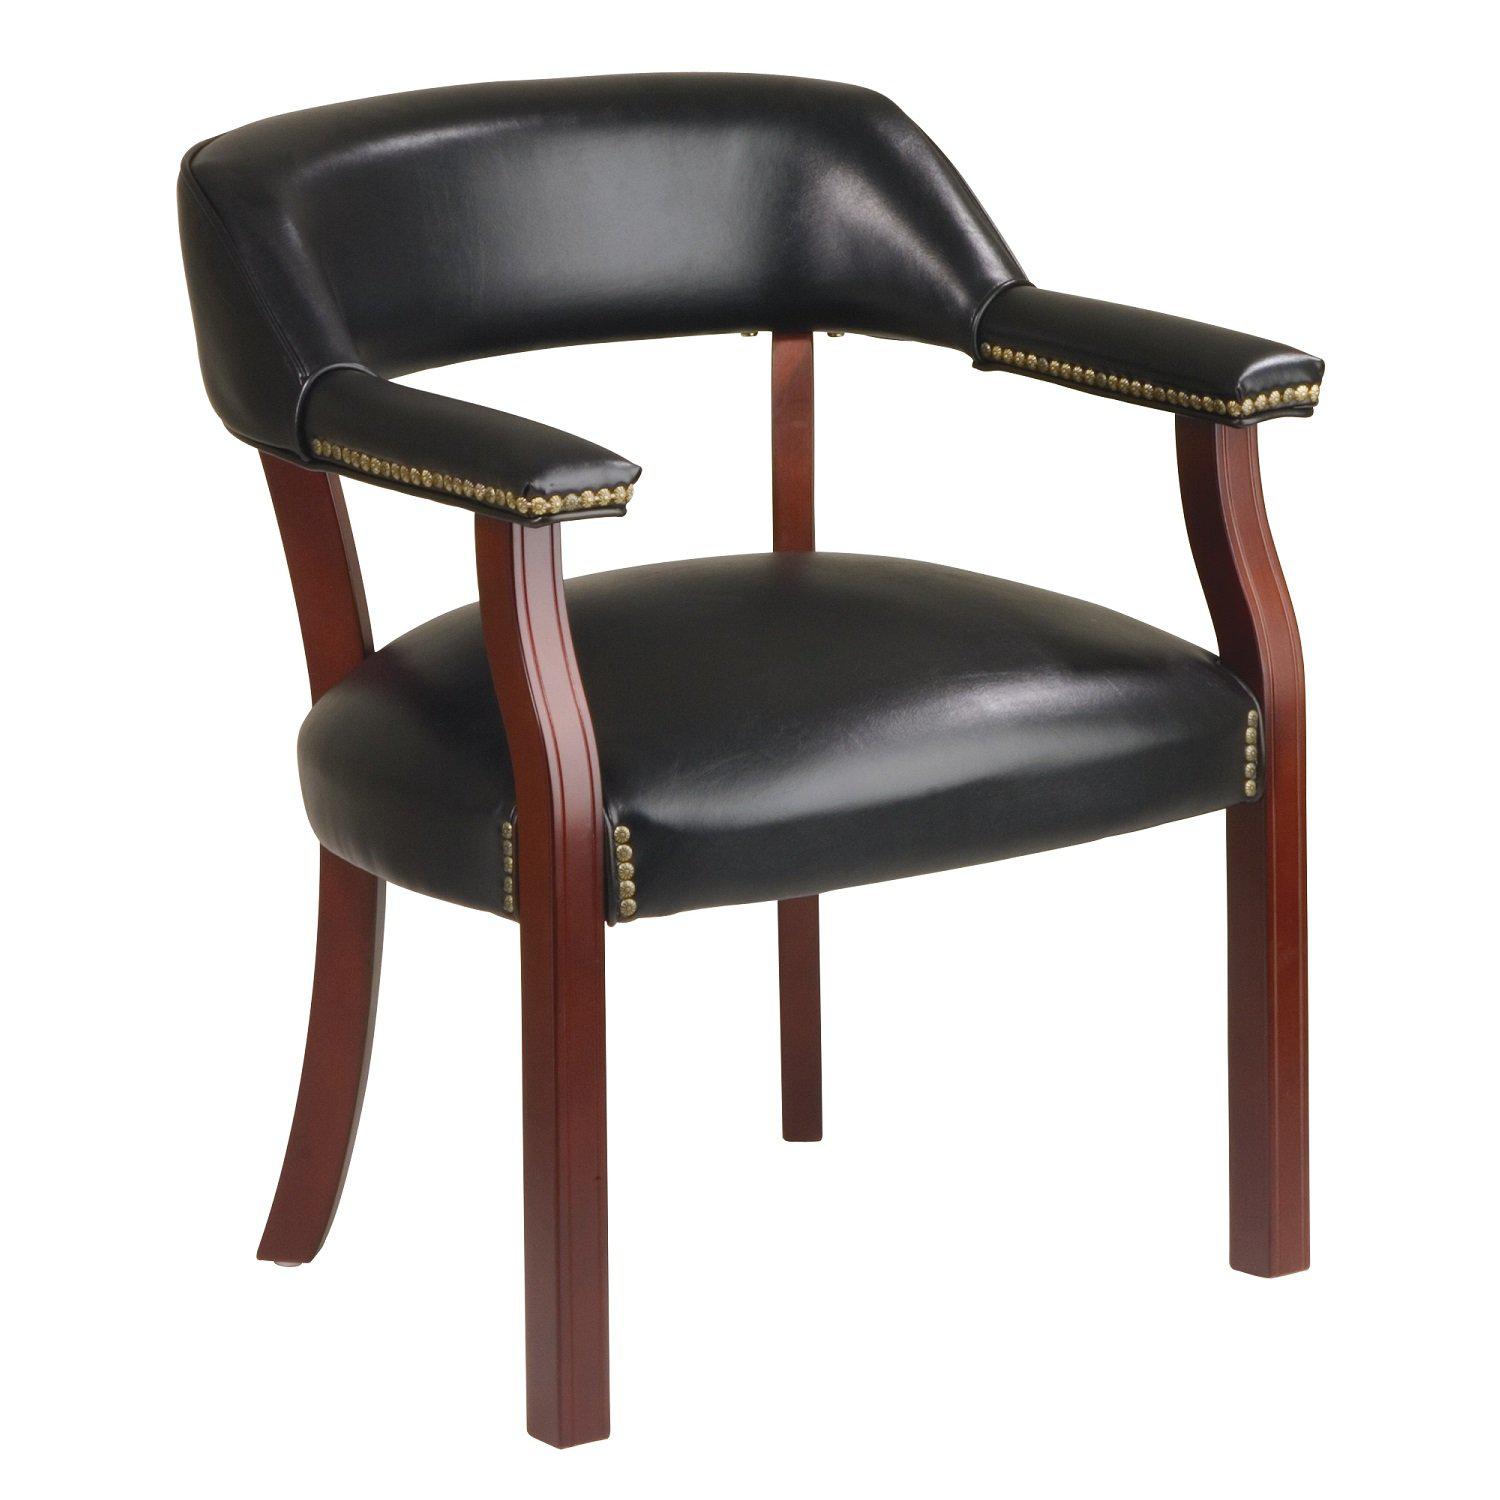 Traditional Guest Chair with Wrap Around Back, Black Vinyl Upholstery